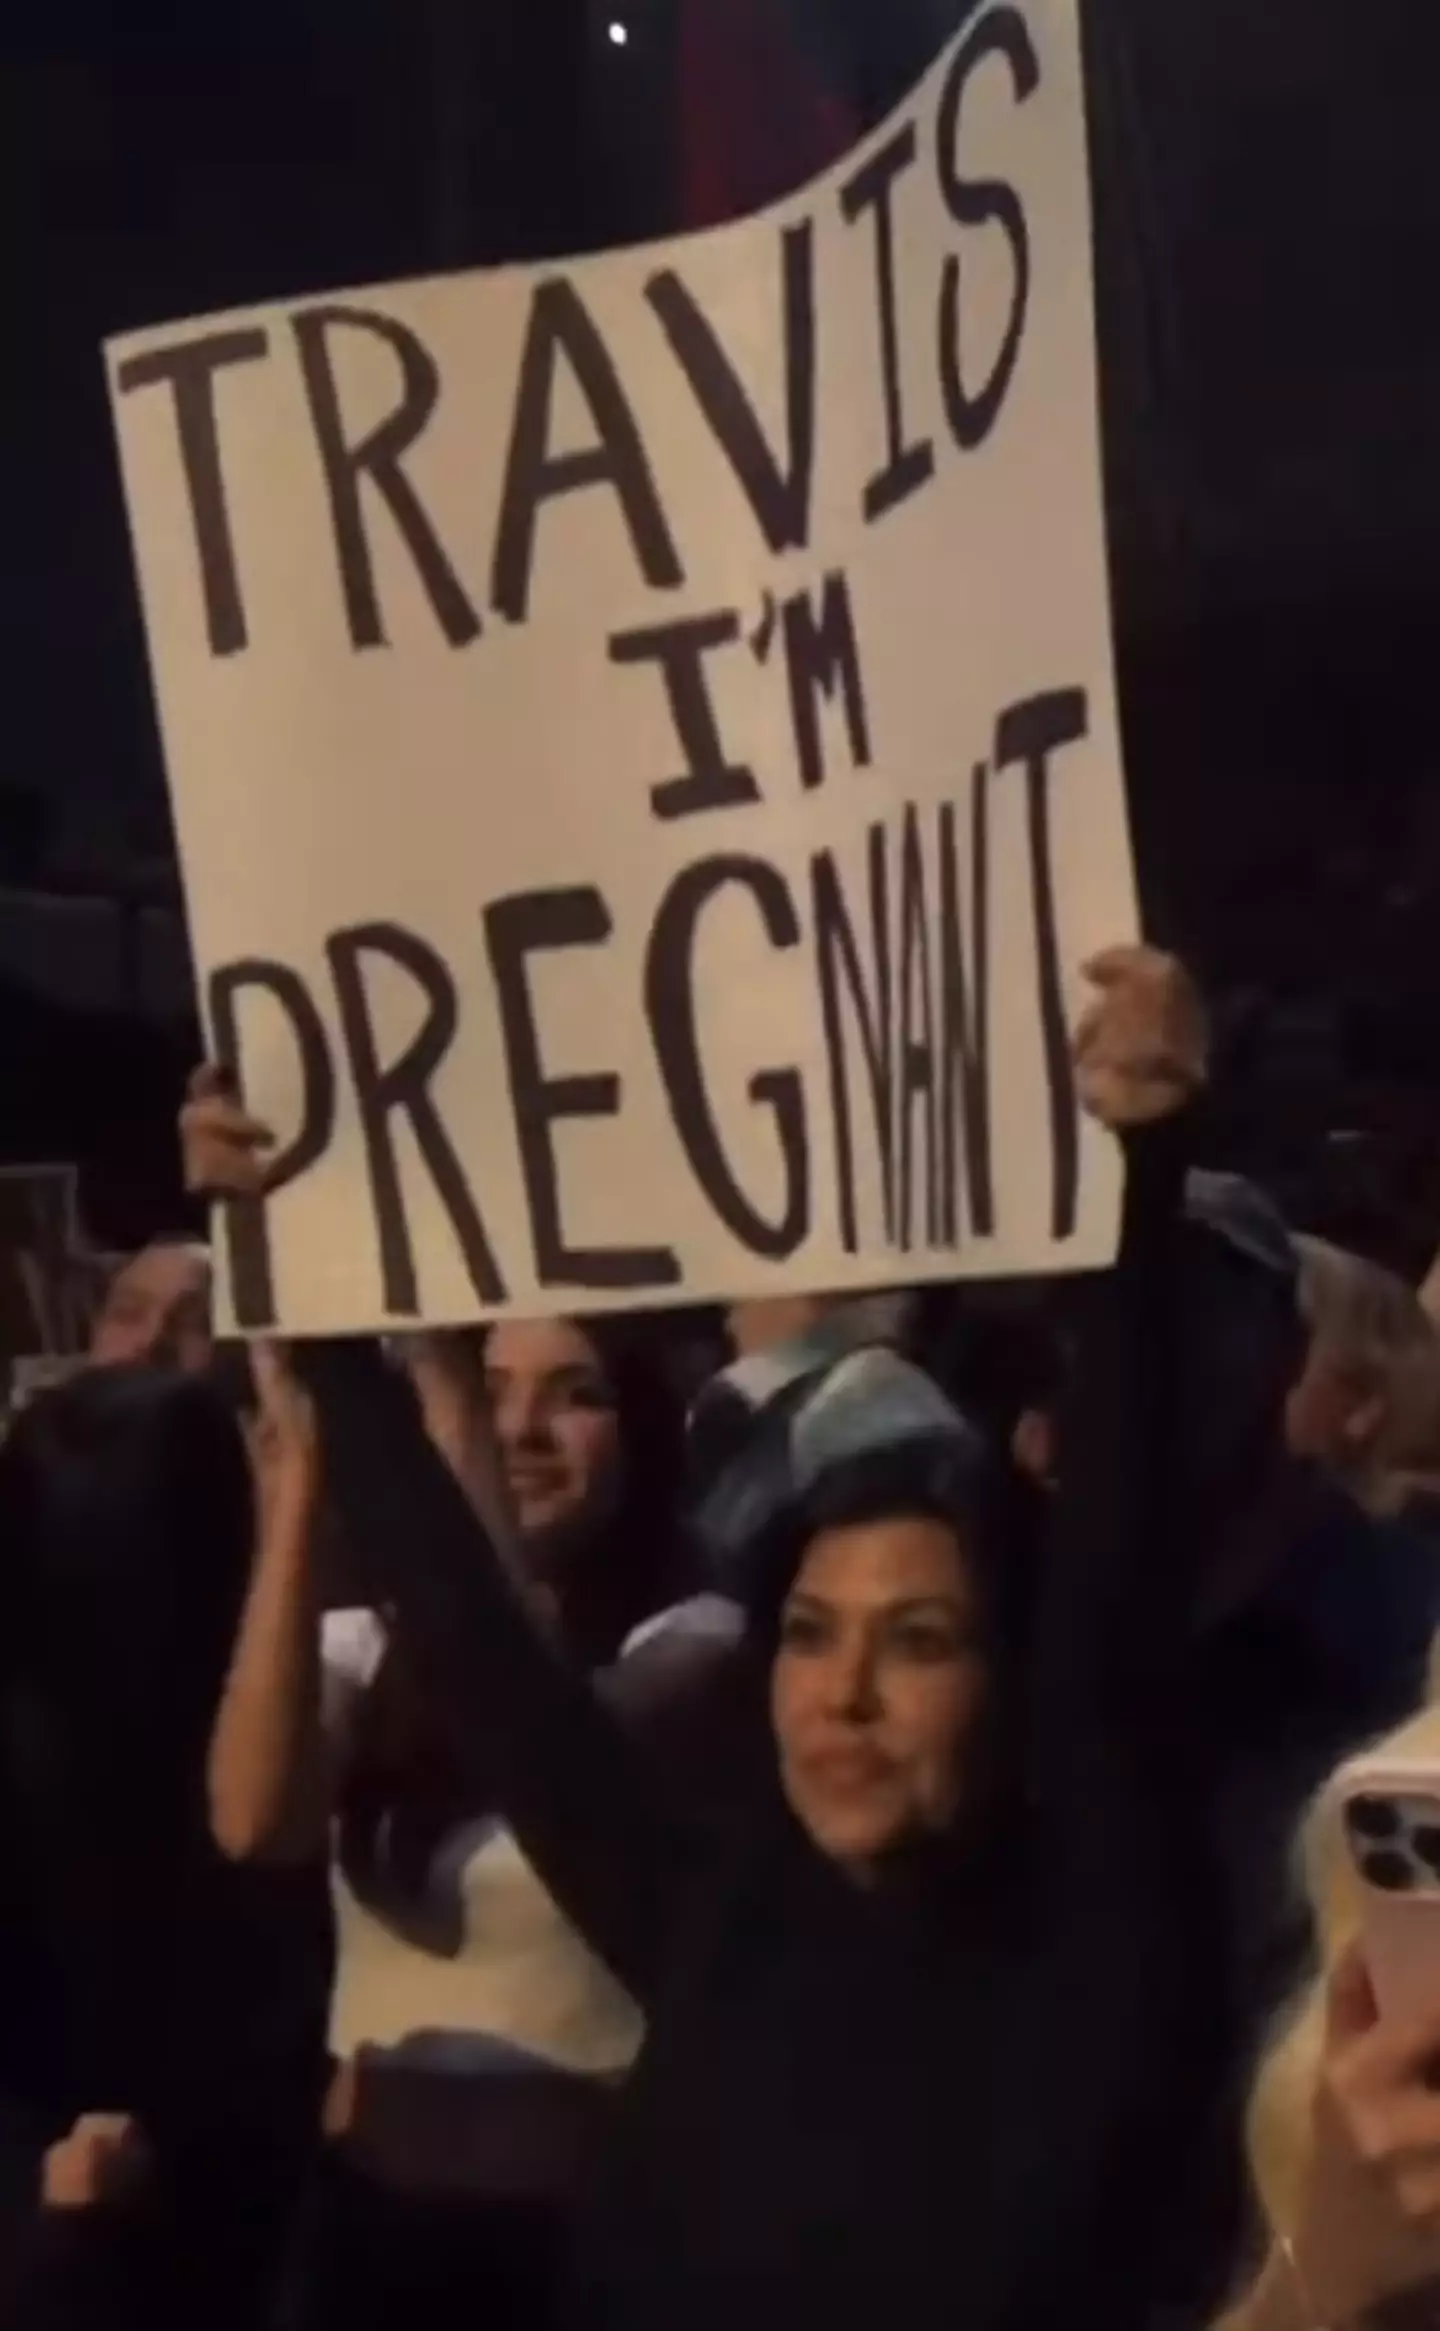 Kourtney Kardashian held up a 'Travis I'm pregnant' sign from the crowd of a Blink-182 concert.